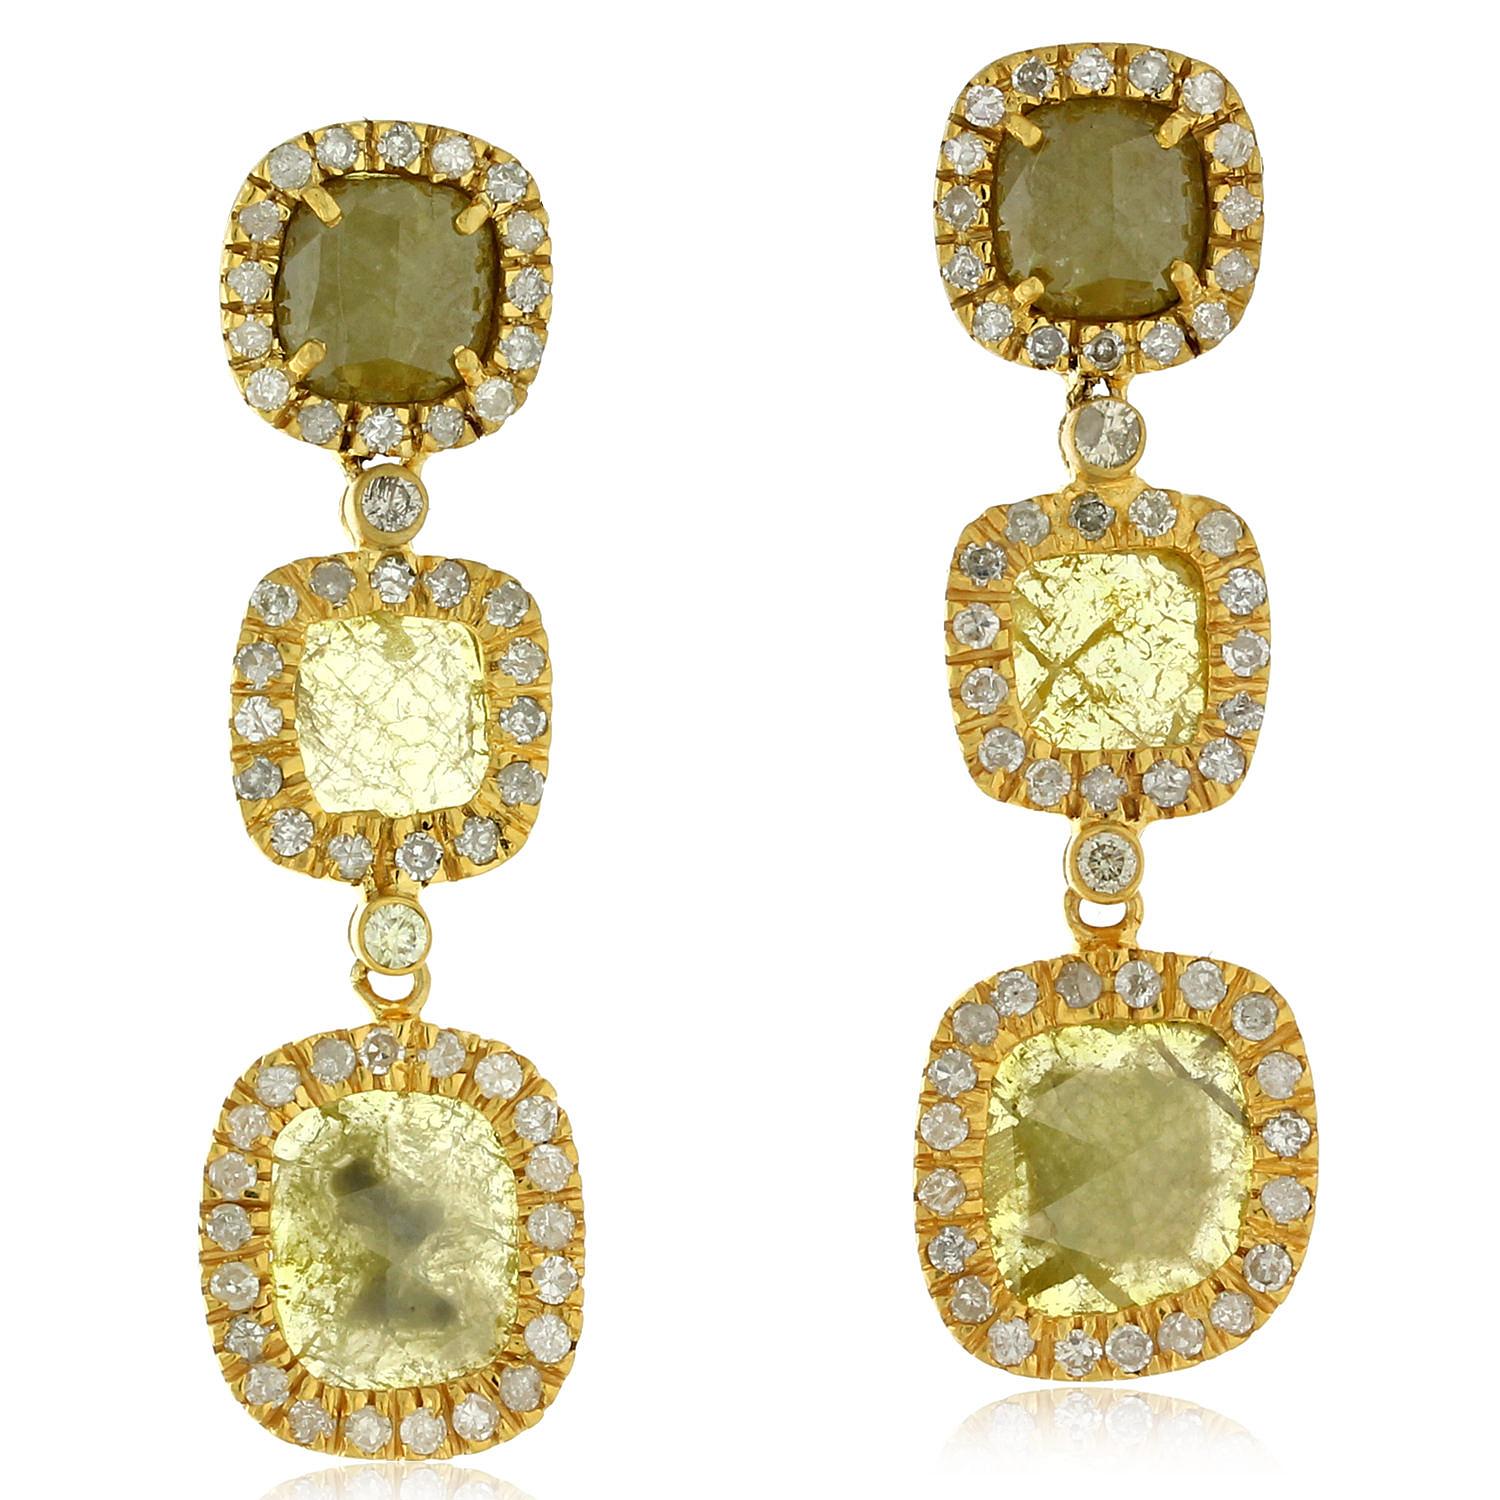 Mixed Cut Multi Colored Cushion Shaped Sliced Ice Diamond Earrings Made in 18k Yellow Gold For Sale